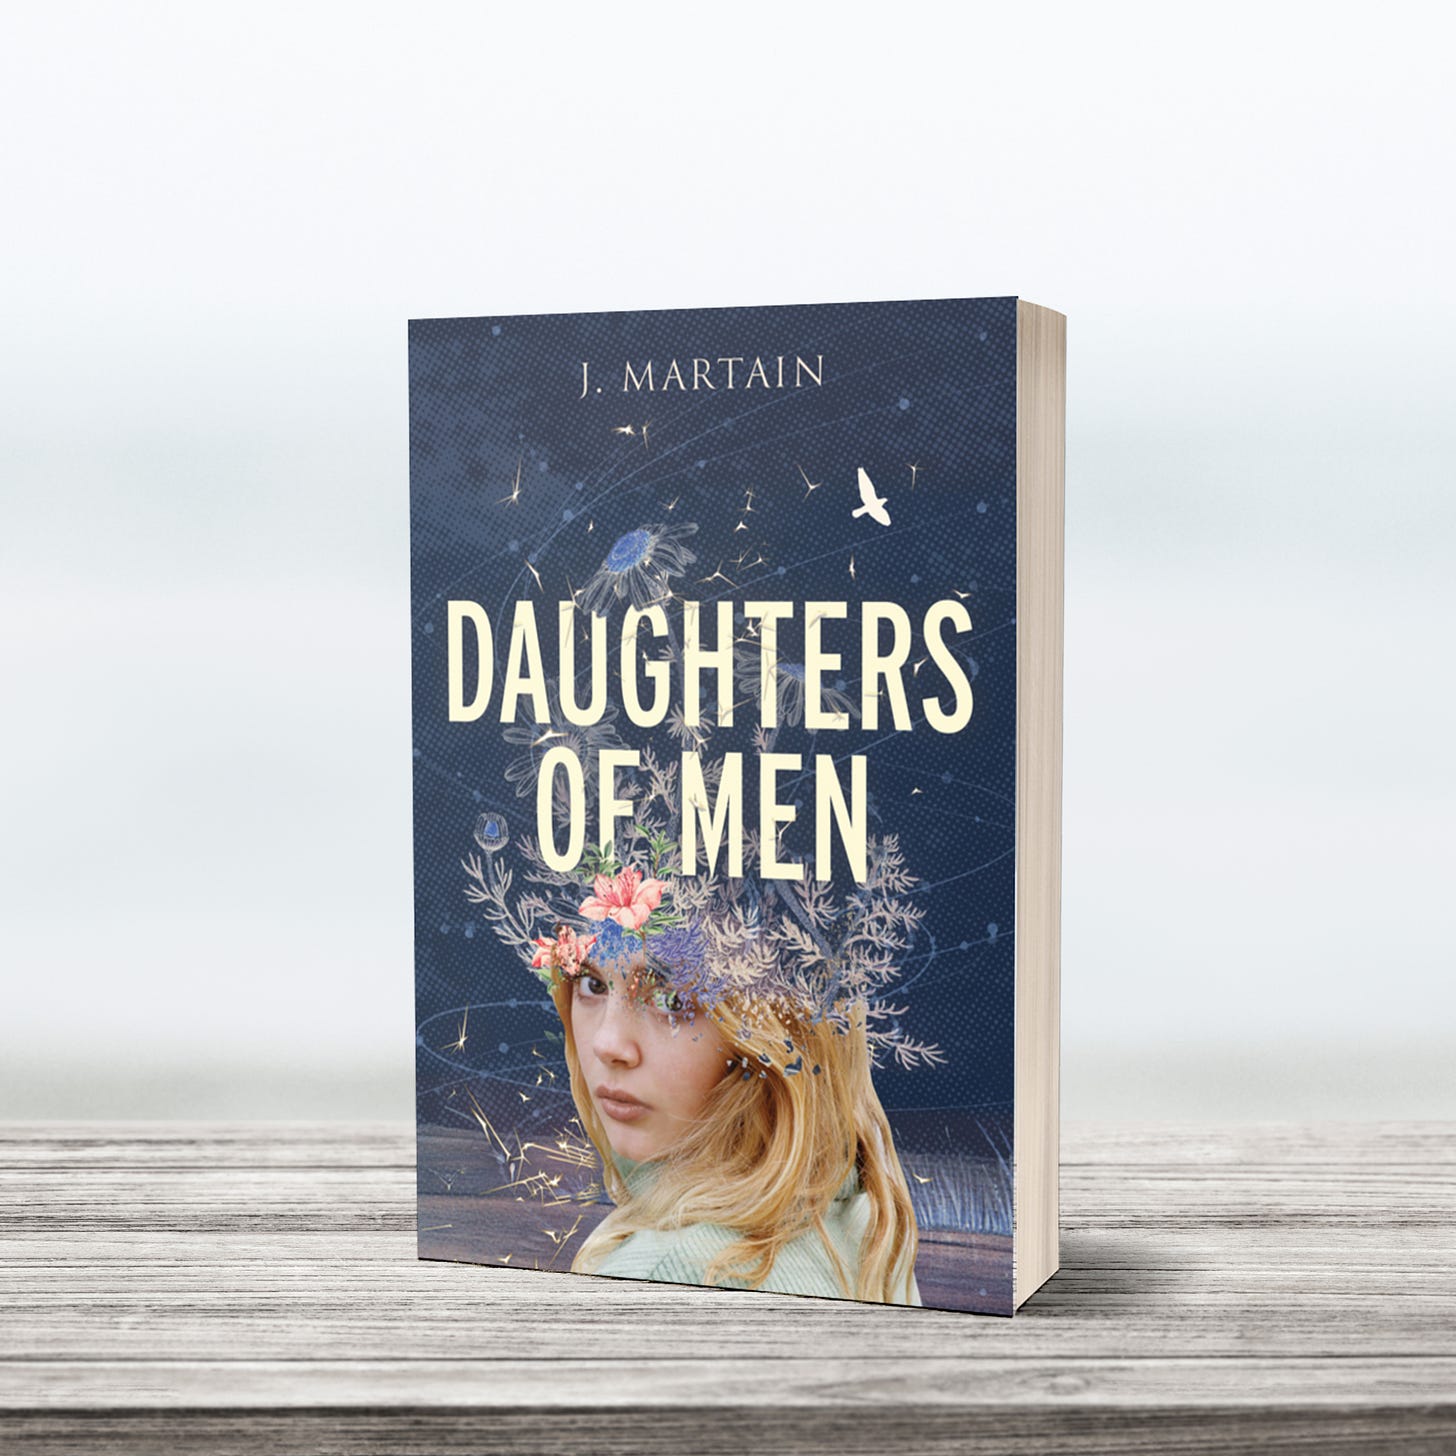 Daughters of Men by J Martain paperback with moody coastal background